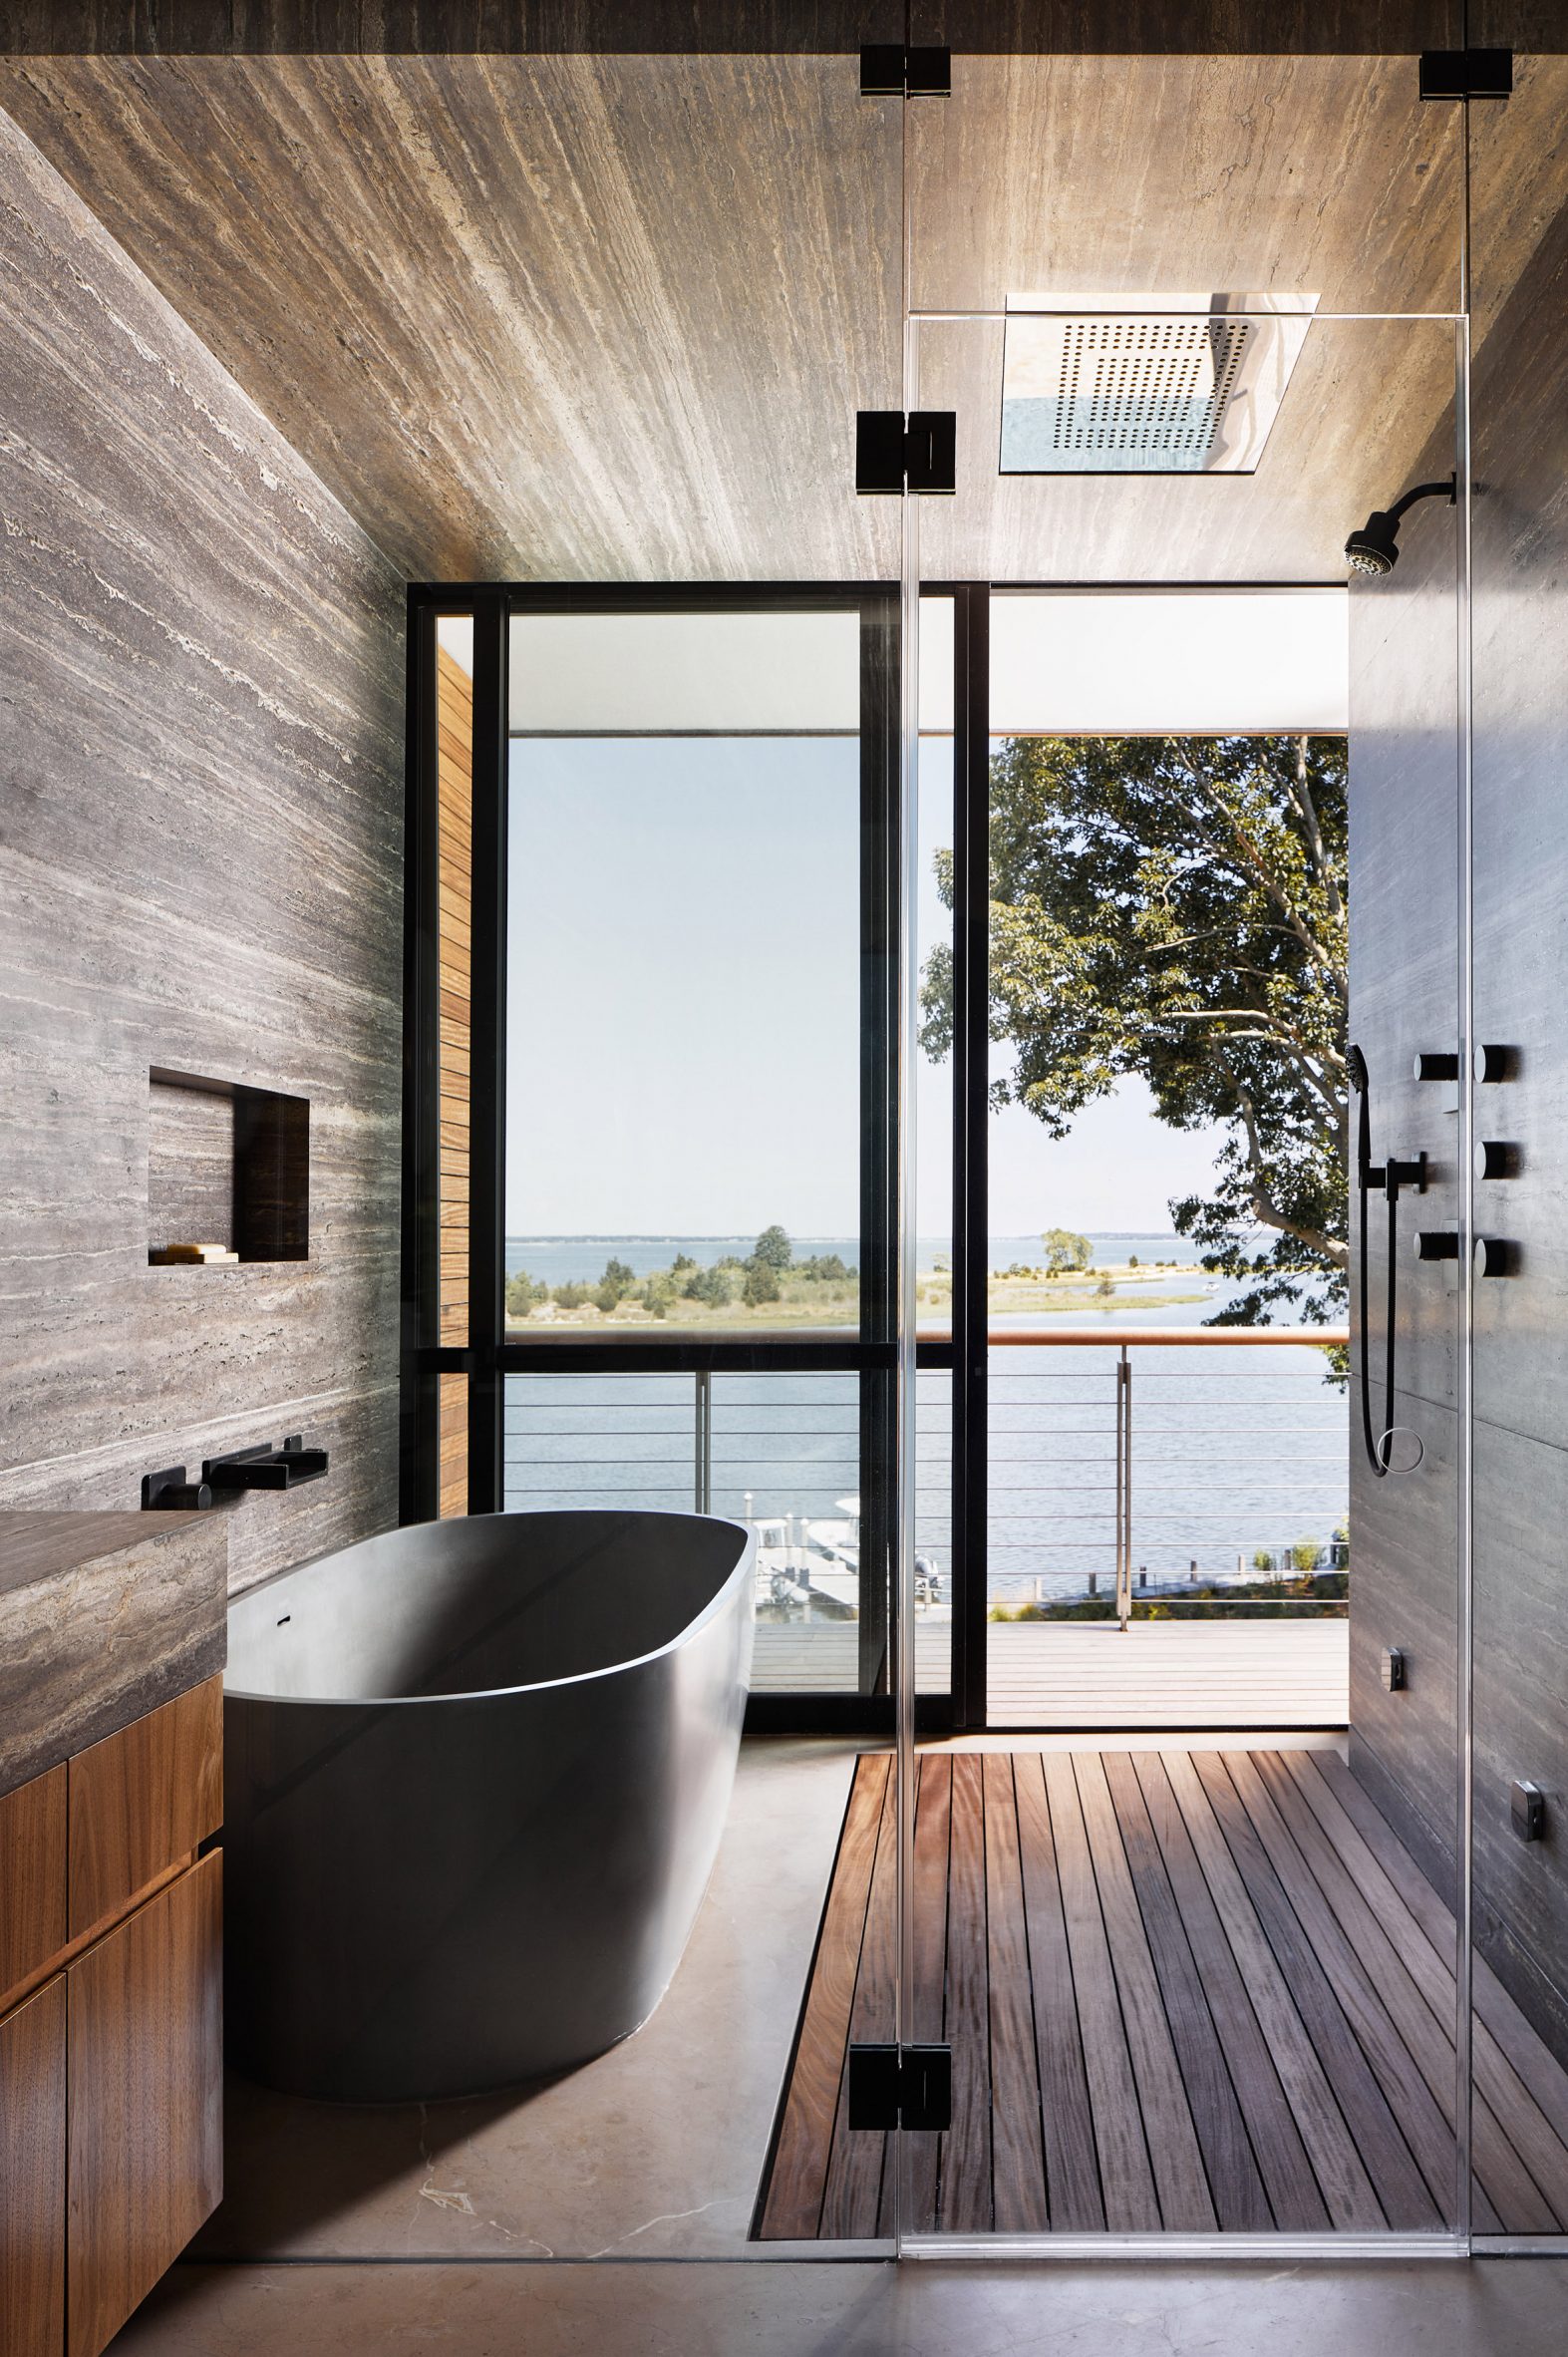 Bathroom with tub and shower that opens onto a balcony